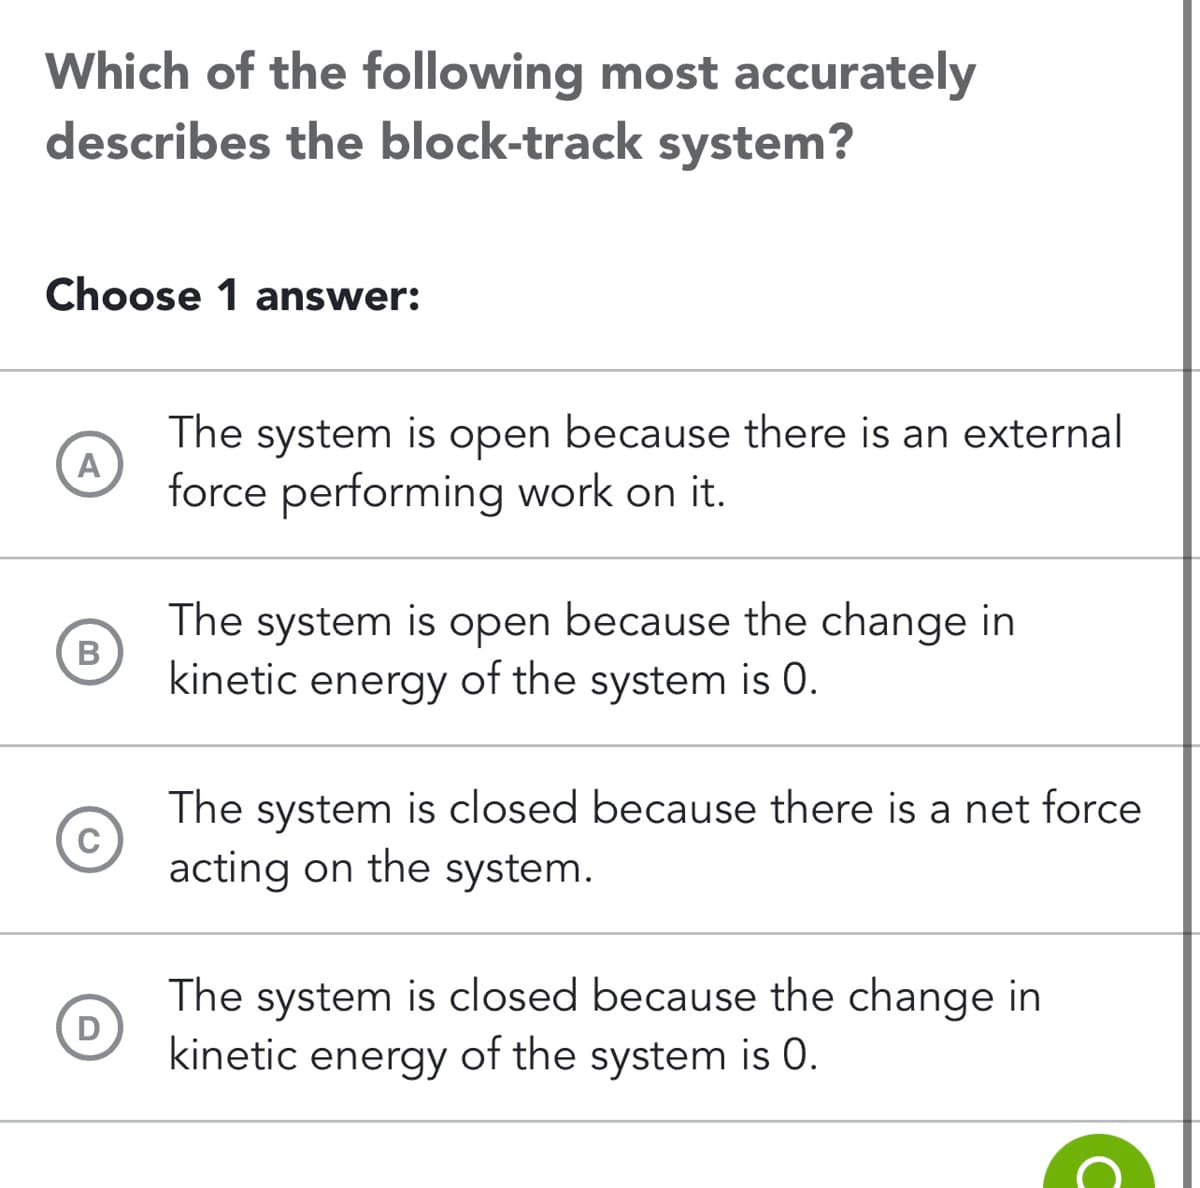 Which of the following most accurately
describes the block-track system?
Choose 1 answer:
A
B
C
D
The system is open because there is an external
force performing work on it.
The system is open because the change in
kinetic energy of the system is 0.
The system is closed because there is a net force
acting on the system.
The system is closed because the change in
kinetic energy of the system is 0.